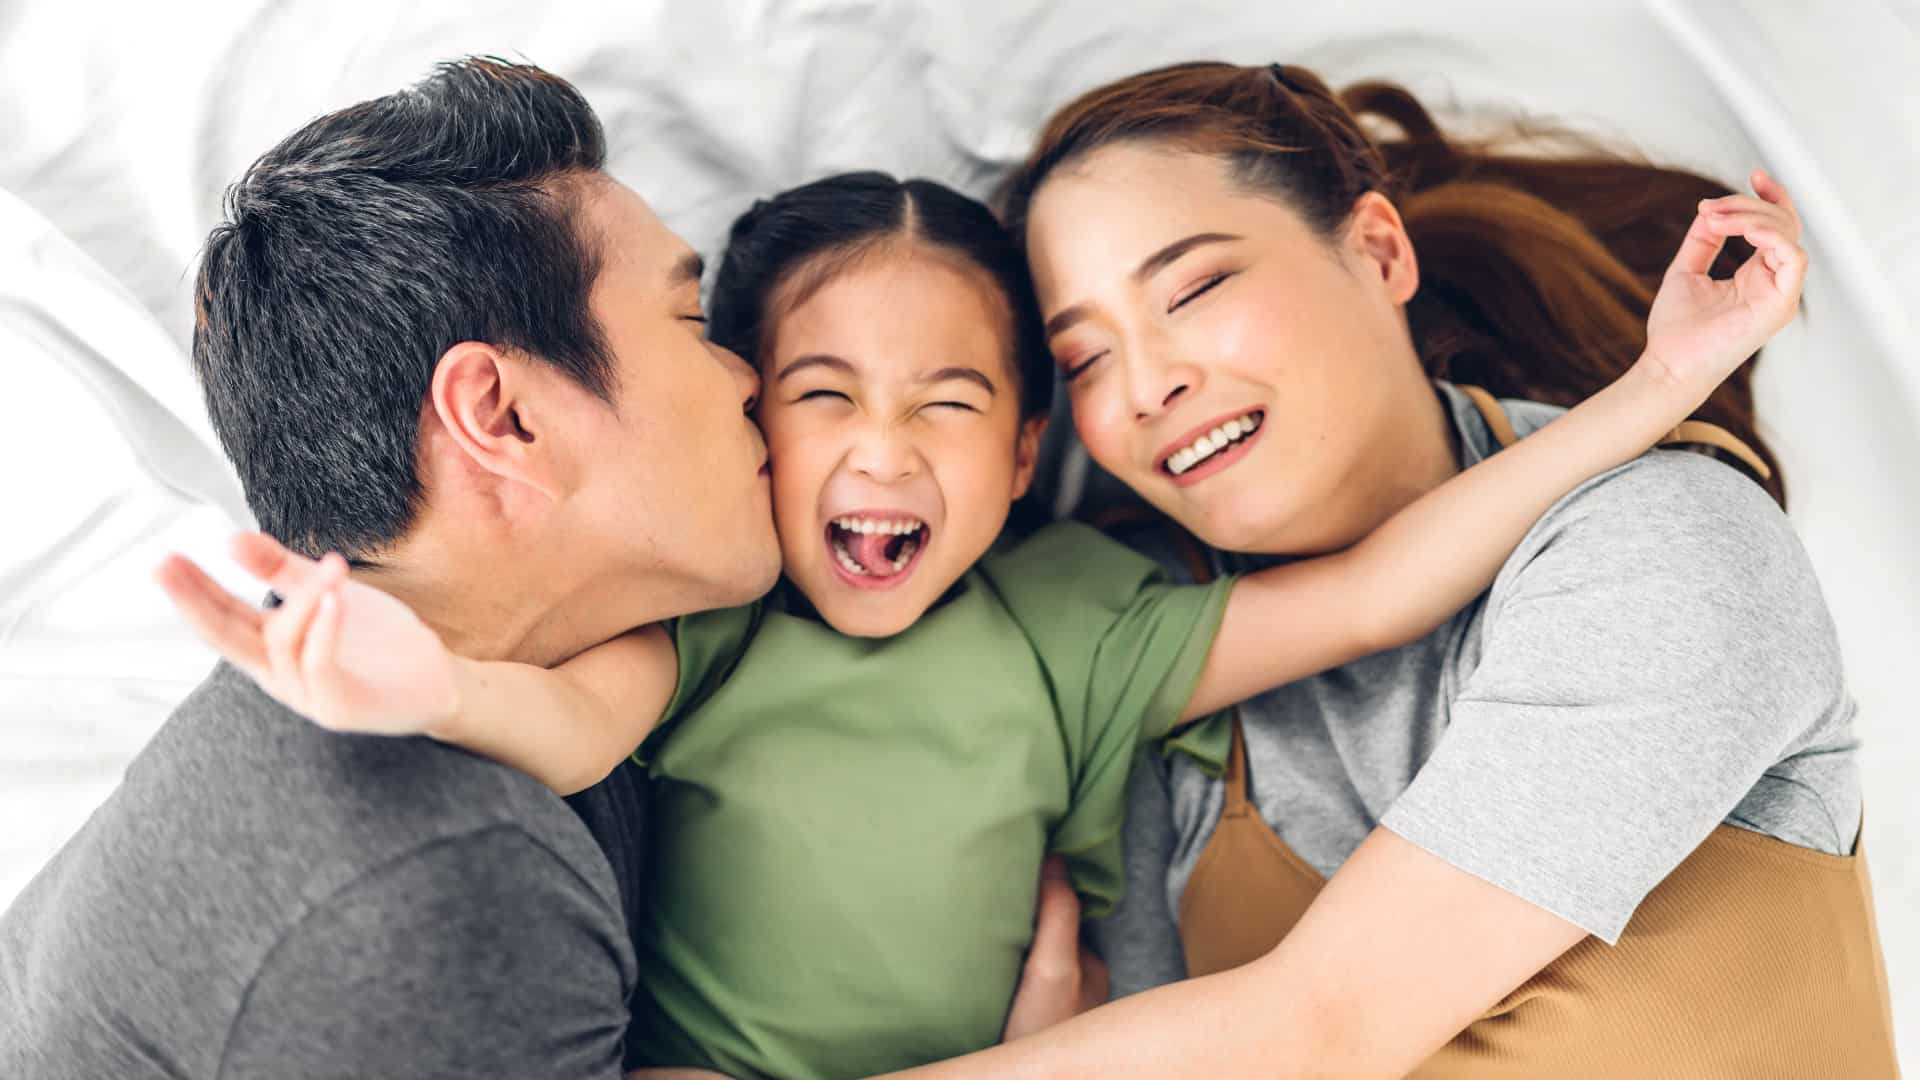 Joyful mom and dad hugging their laughing young daughter as they lie together on a bed